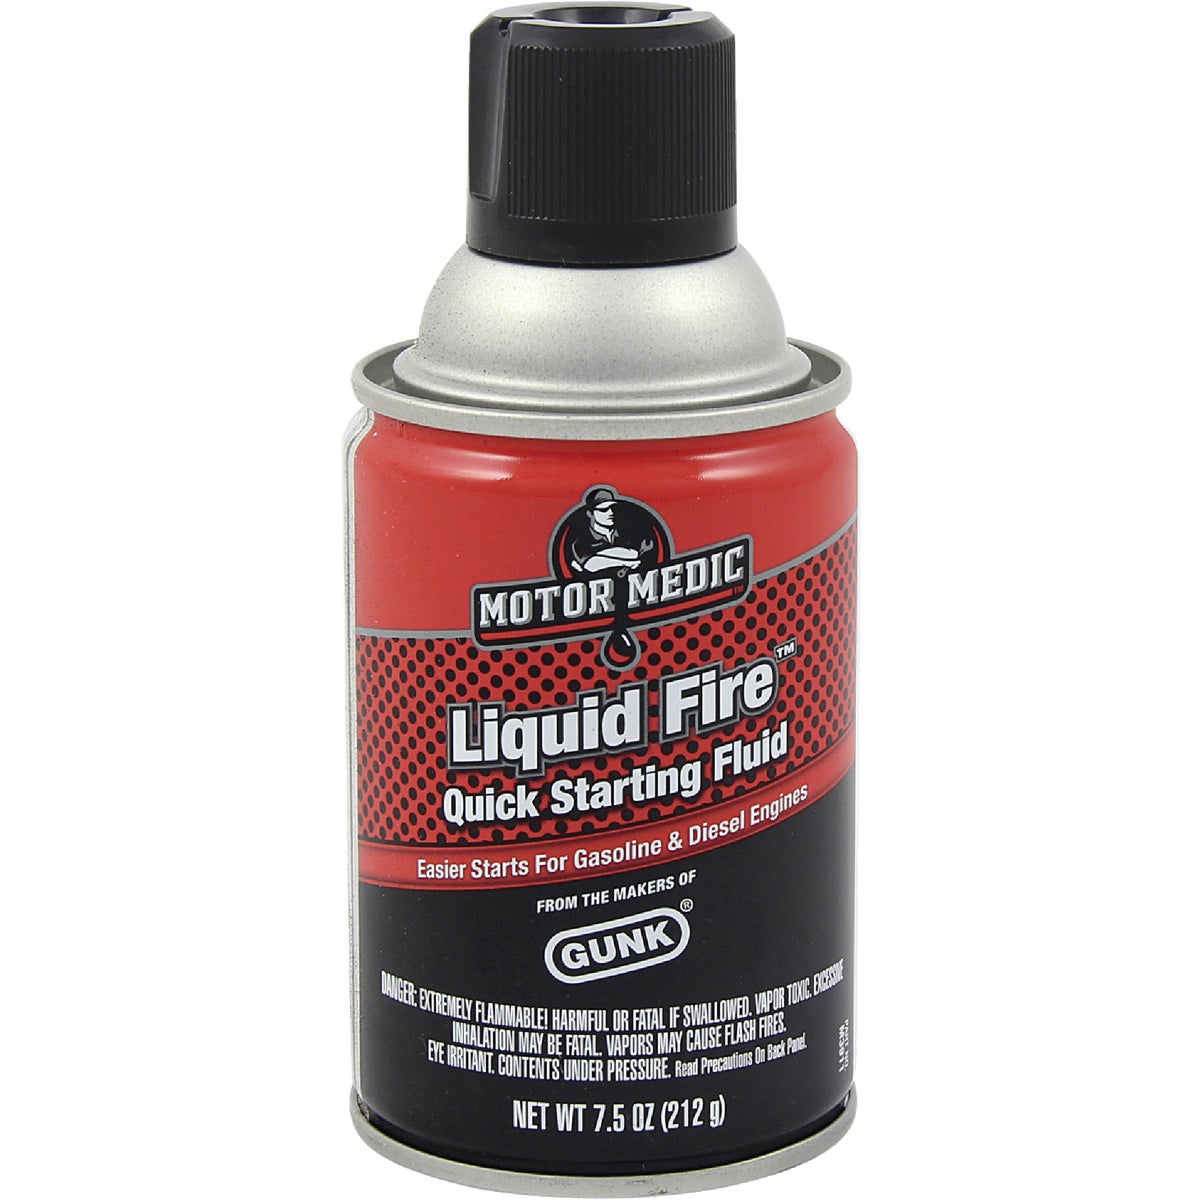 Item 576271, Designed for all gasoline engines and diesel engines without glow plugs.